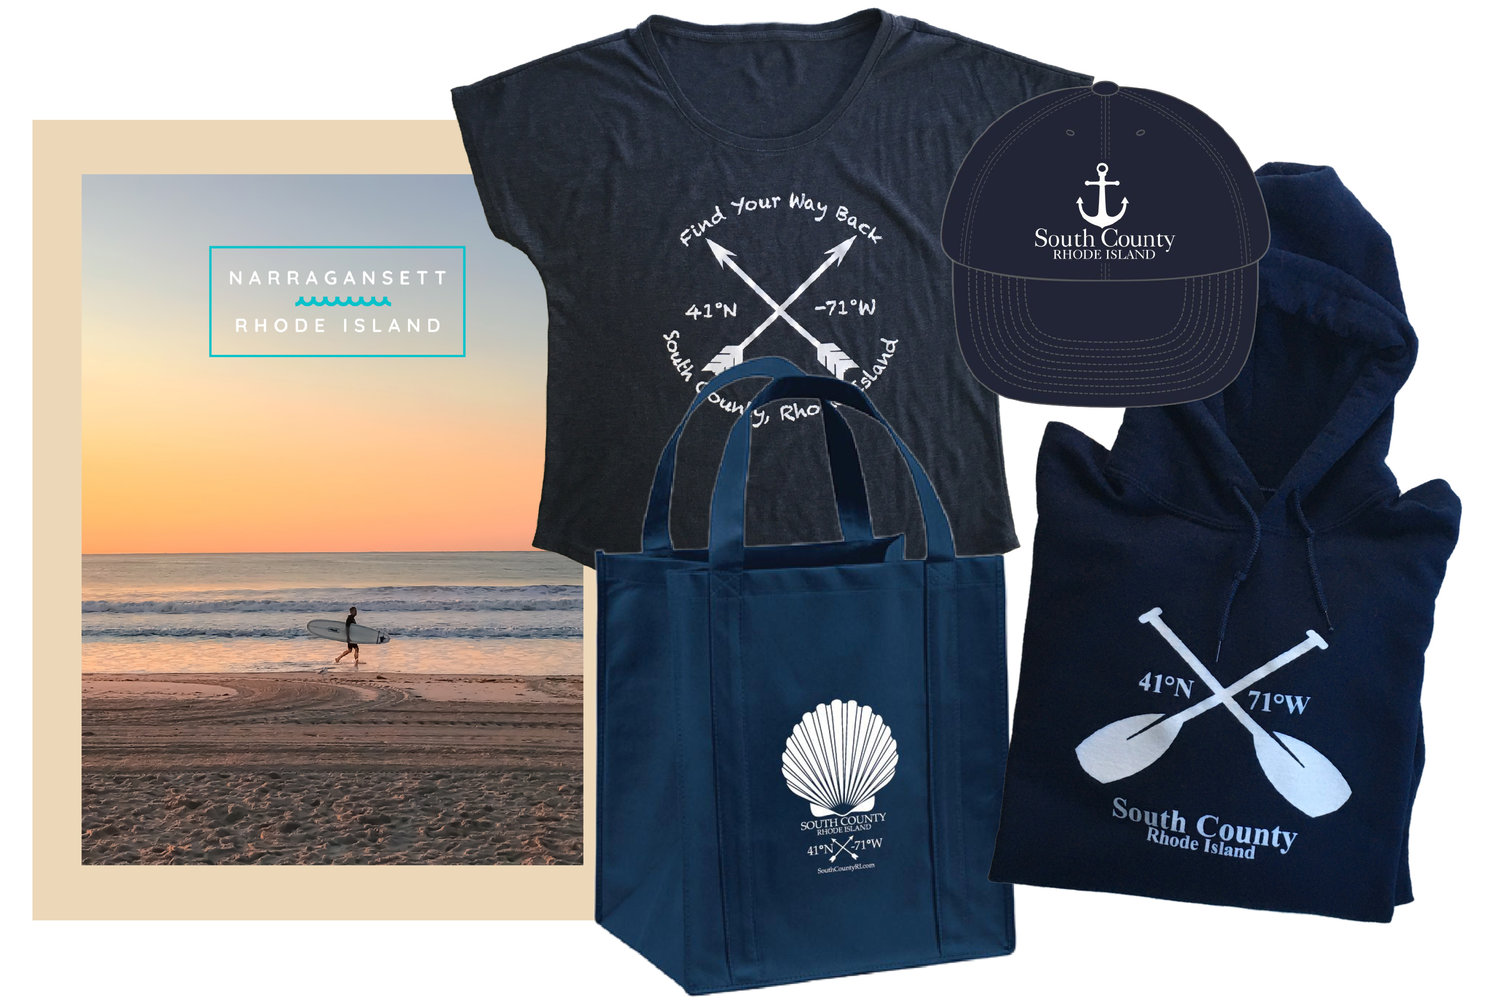 18”x24” Narragansett Beach Surfer Poster, Find Your Way Back T-shirt, Navy Blue Anchor Baseball Hat, Hooded Navy Blue Sweatshirt, Find Your Way Back Navy Blue Recycled Tote